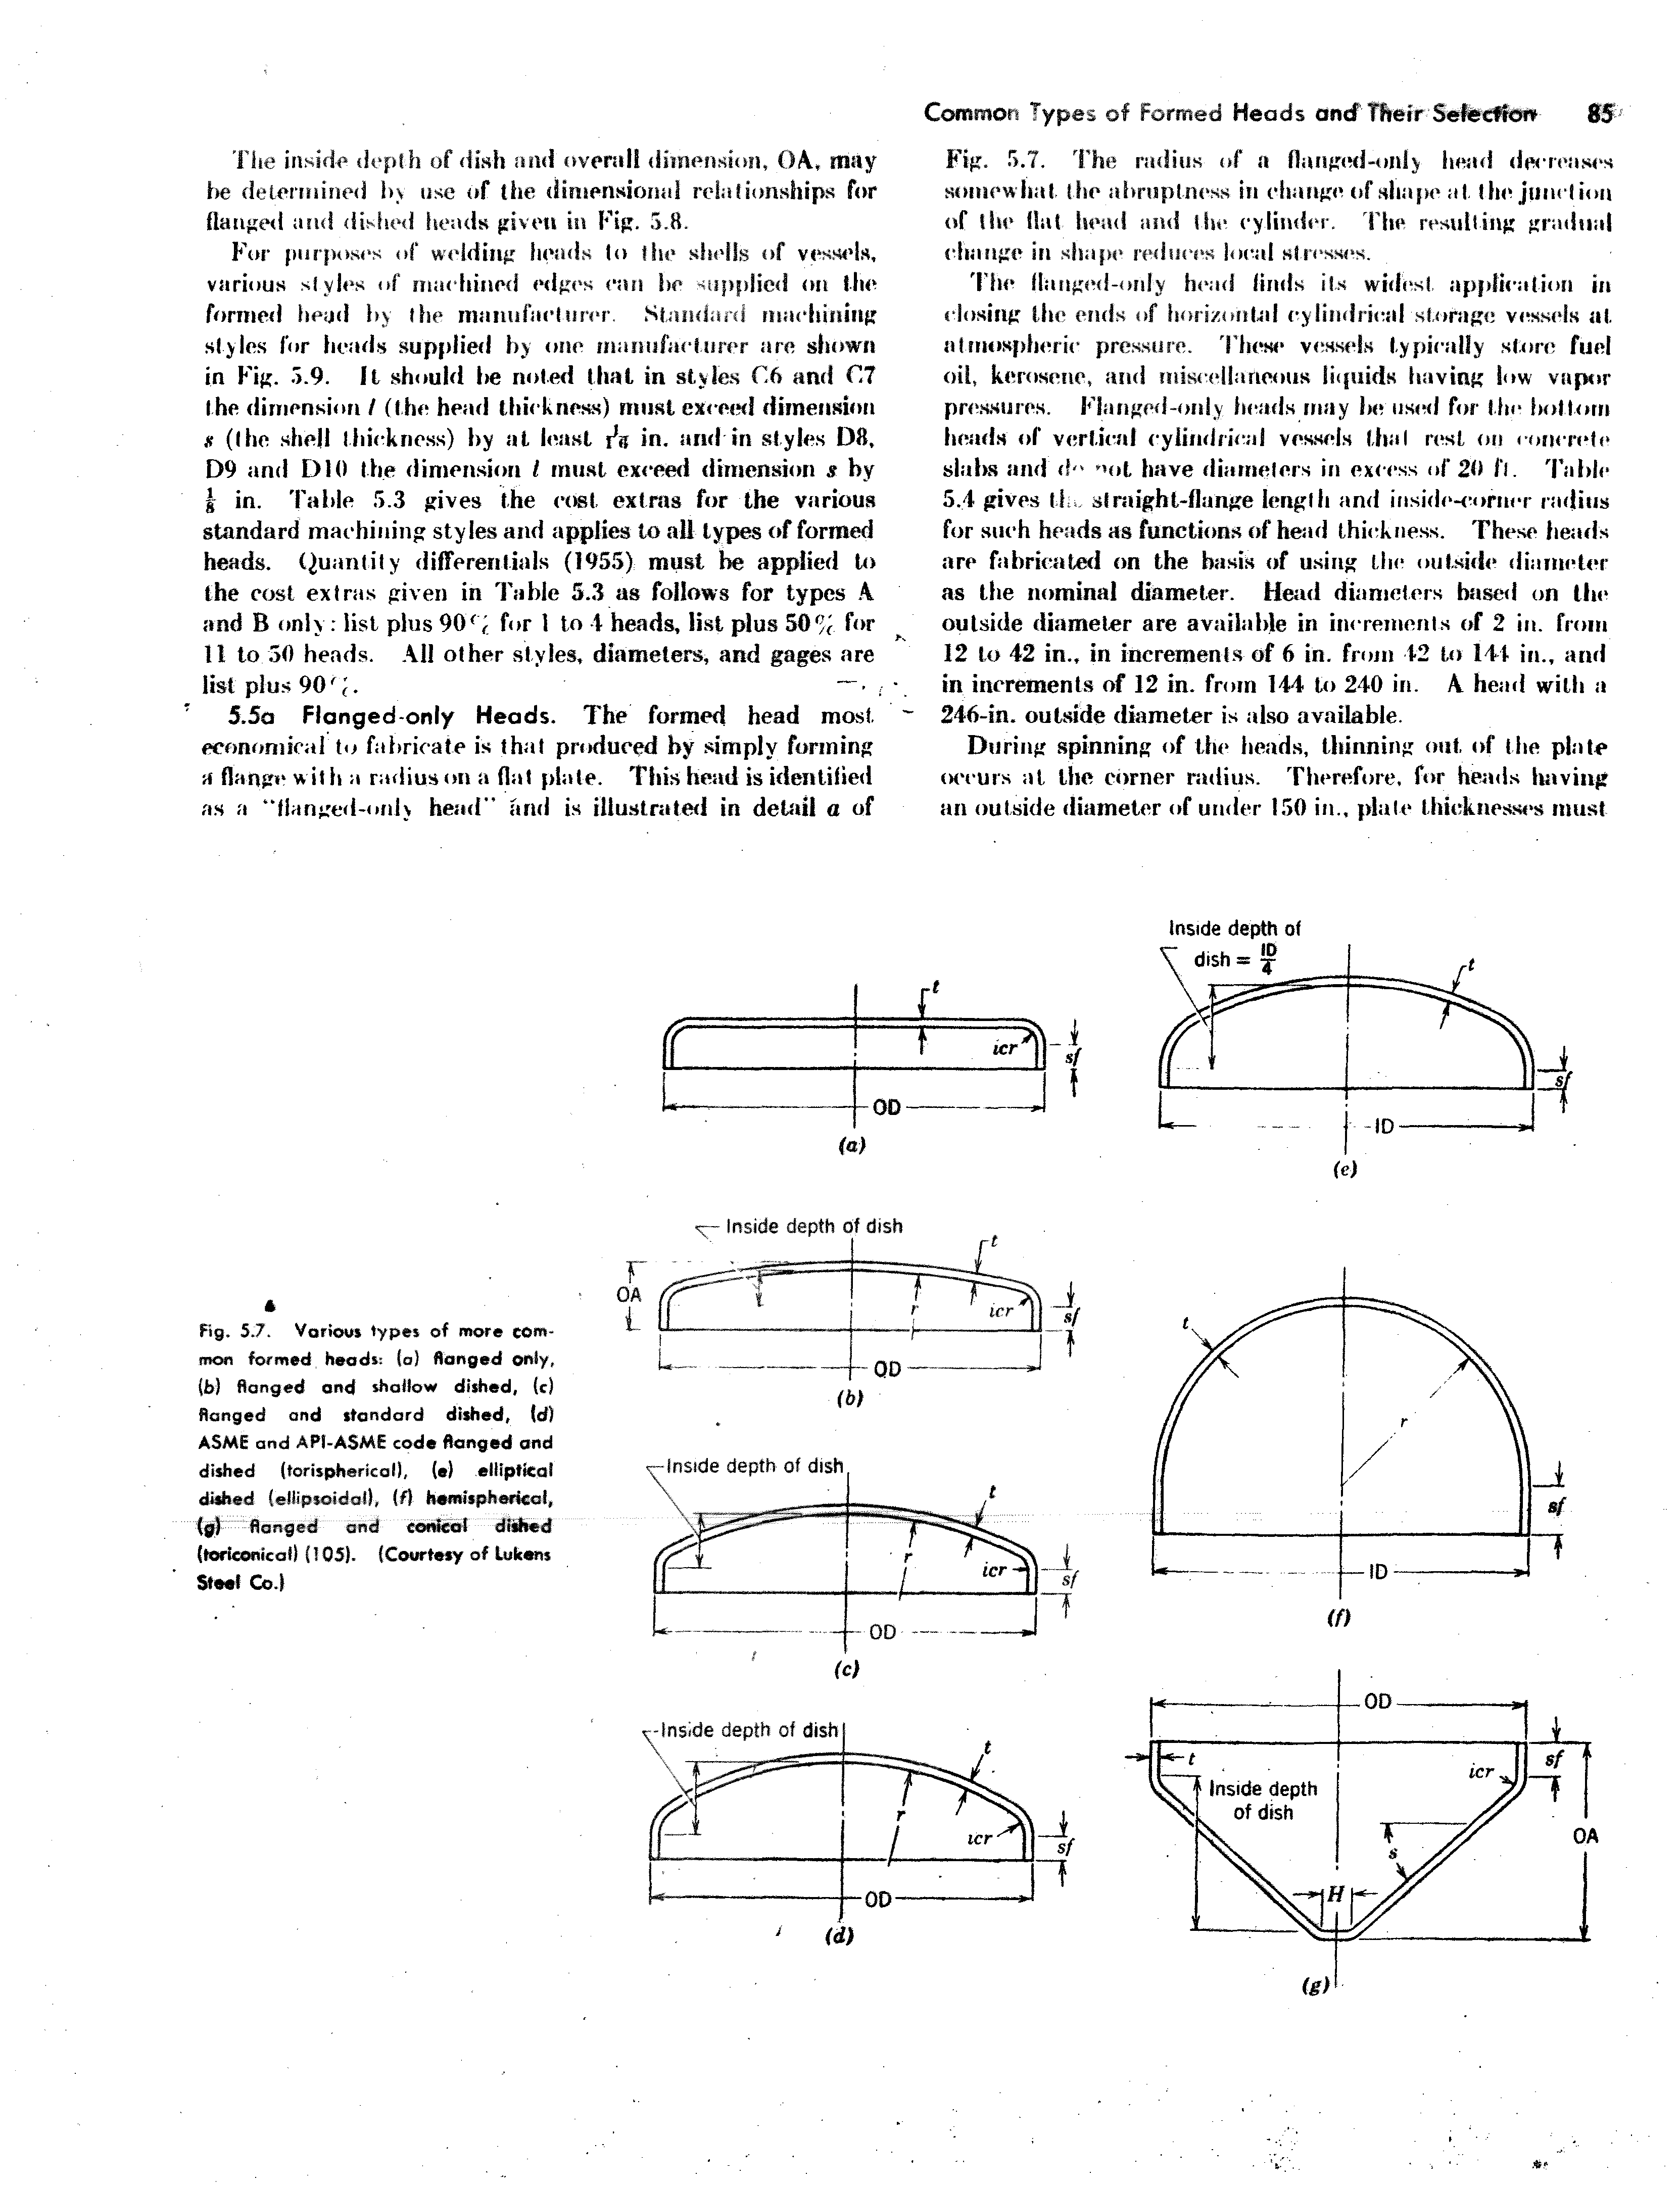 Fig. 5.7. The radius of a flanged-only head de<Teas< s soinewhal, the abruptness in cliange of shape at. the jiinclion of the flat head and the cylinder. The resulting gradual (diatige in shape reduces loital H(ress s.